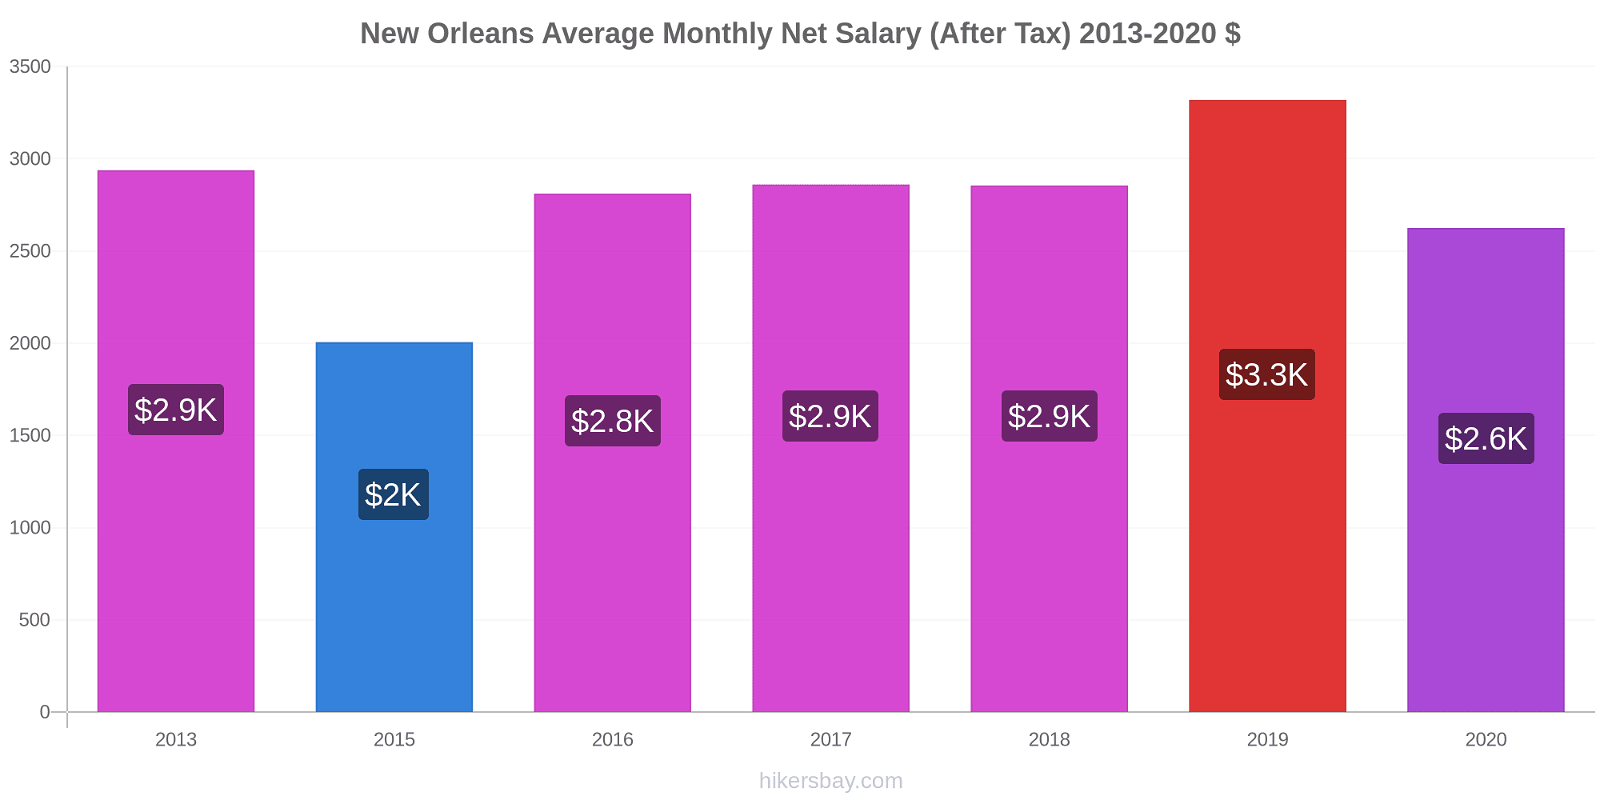 New Orleans price changes Average Monthly Net Salary (After Tax) hikersbay.com